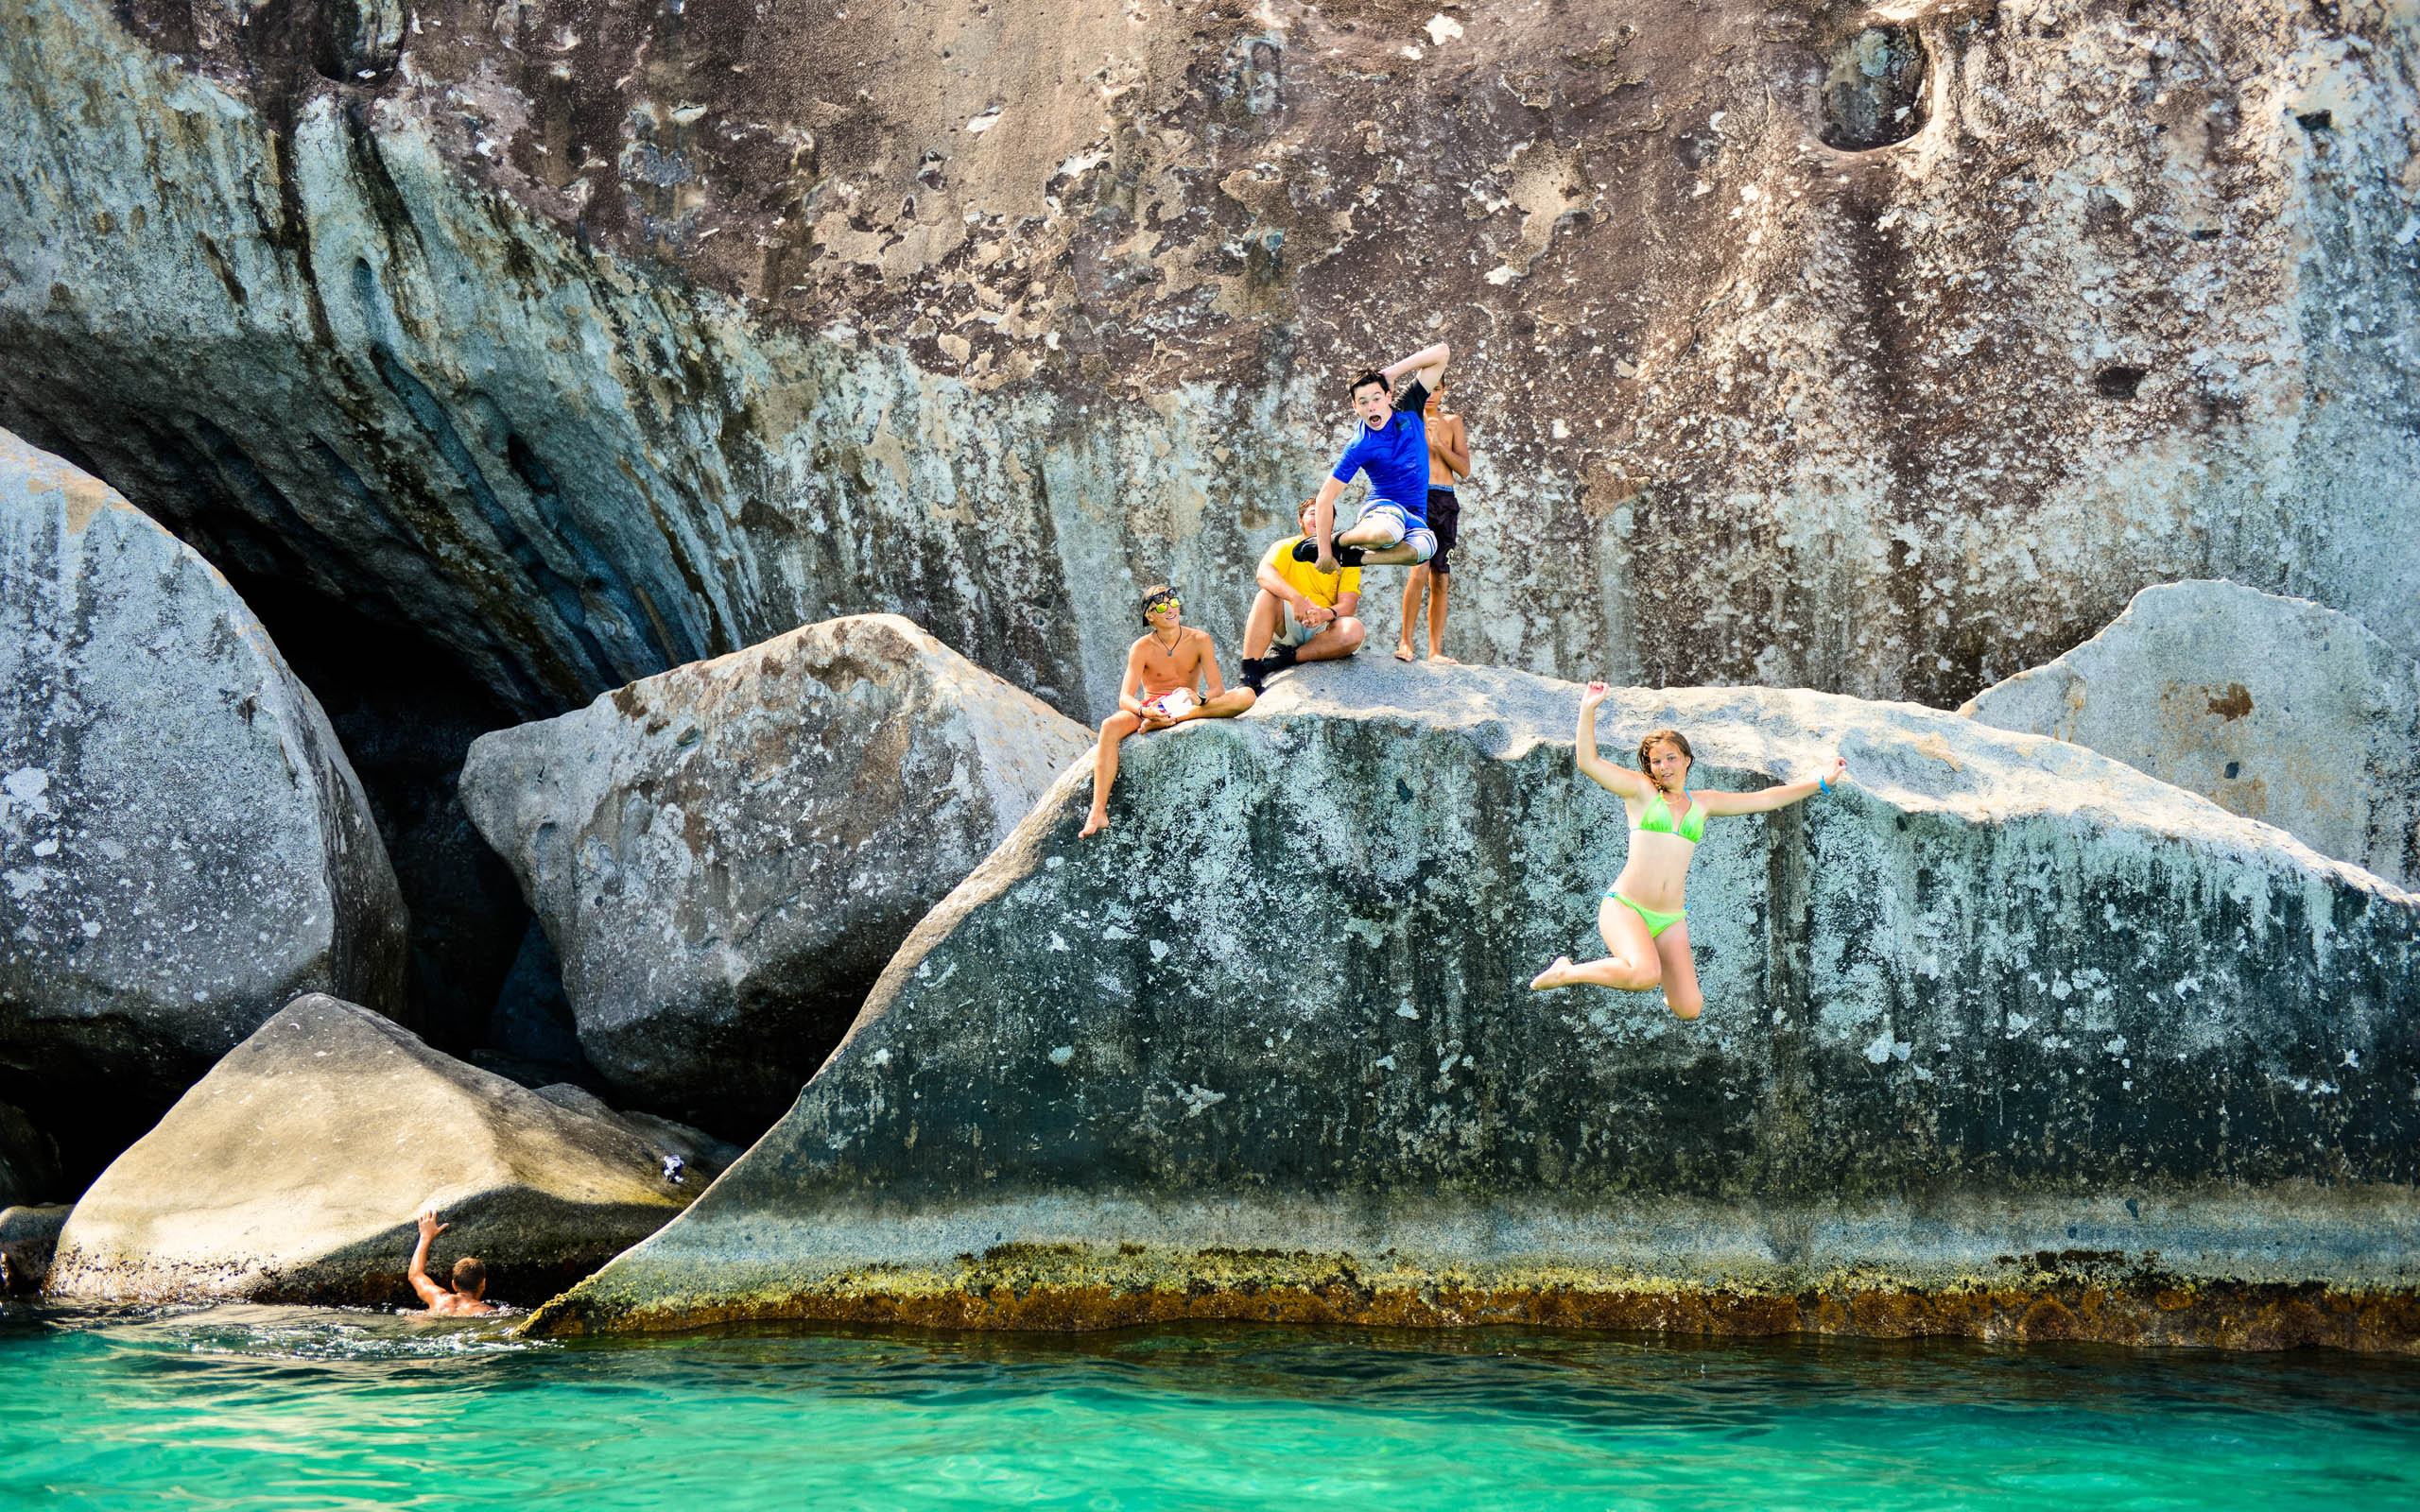 A group of people jumping off of a large rock.